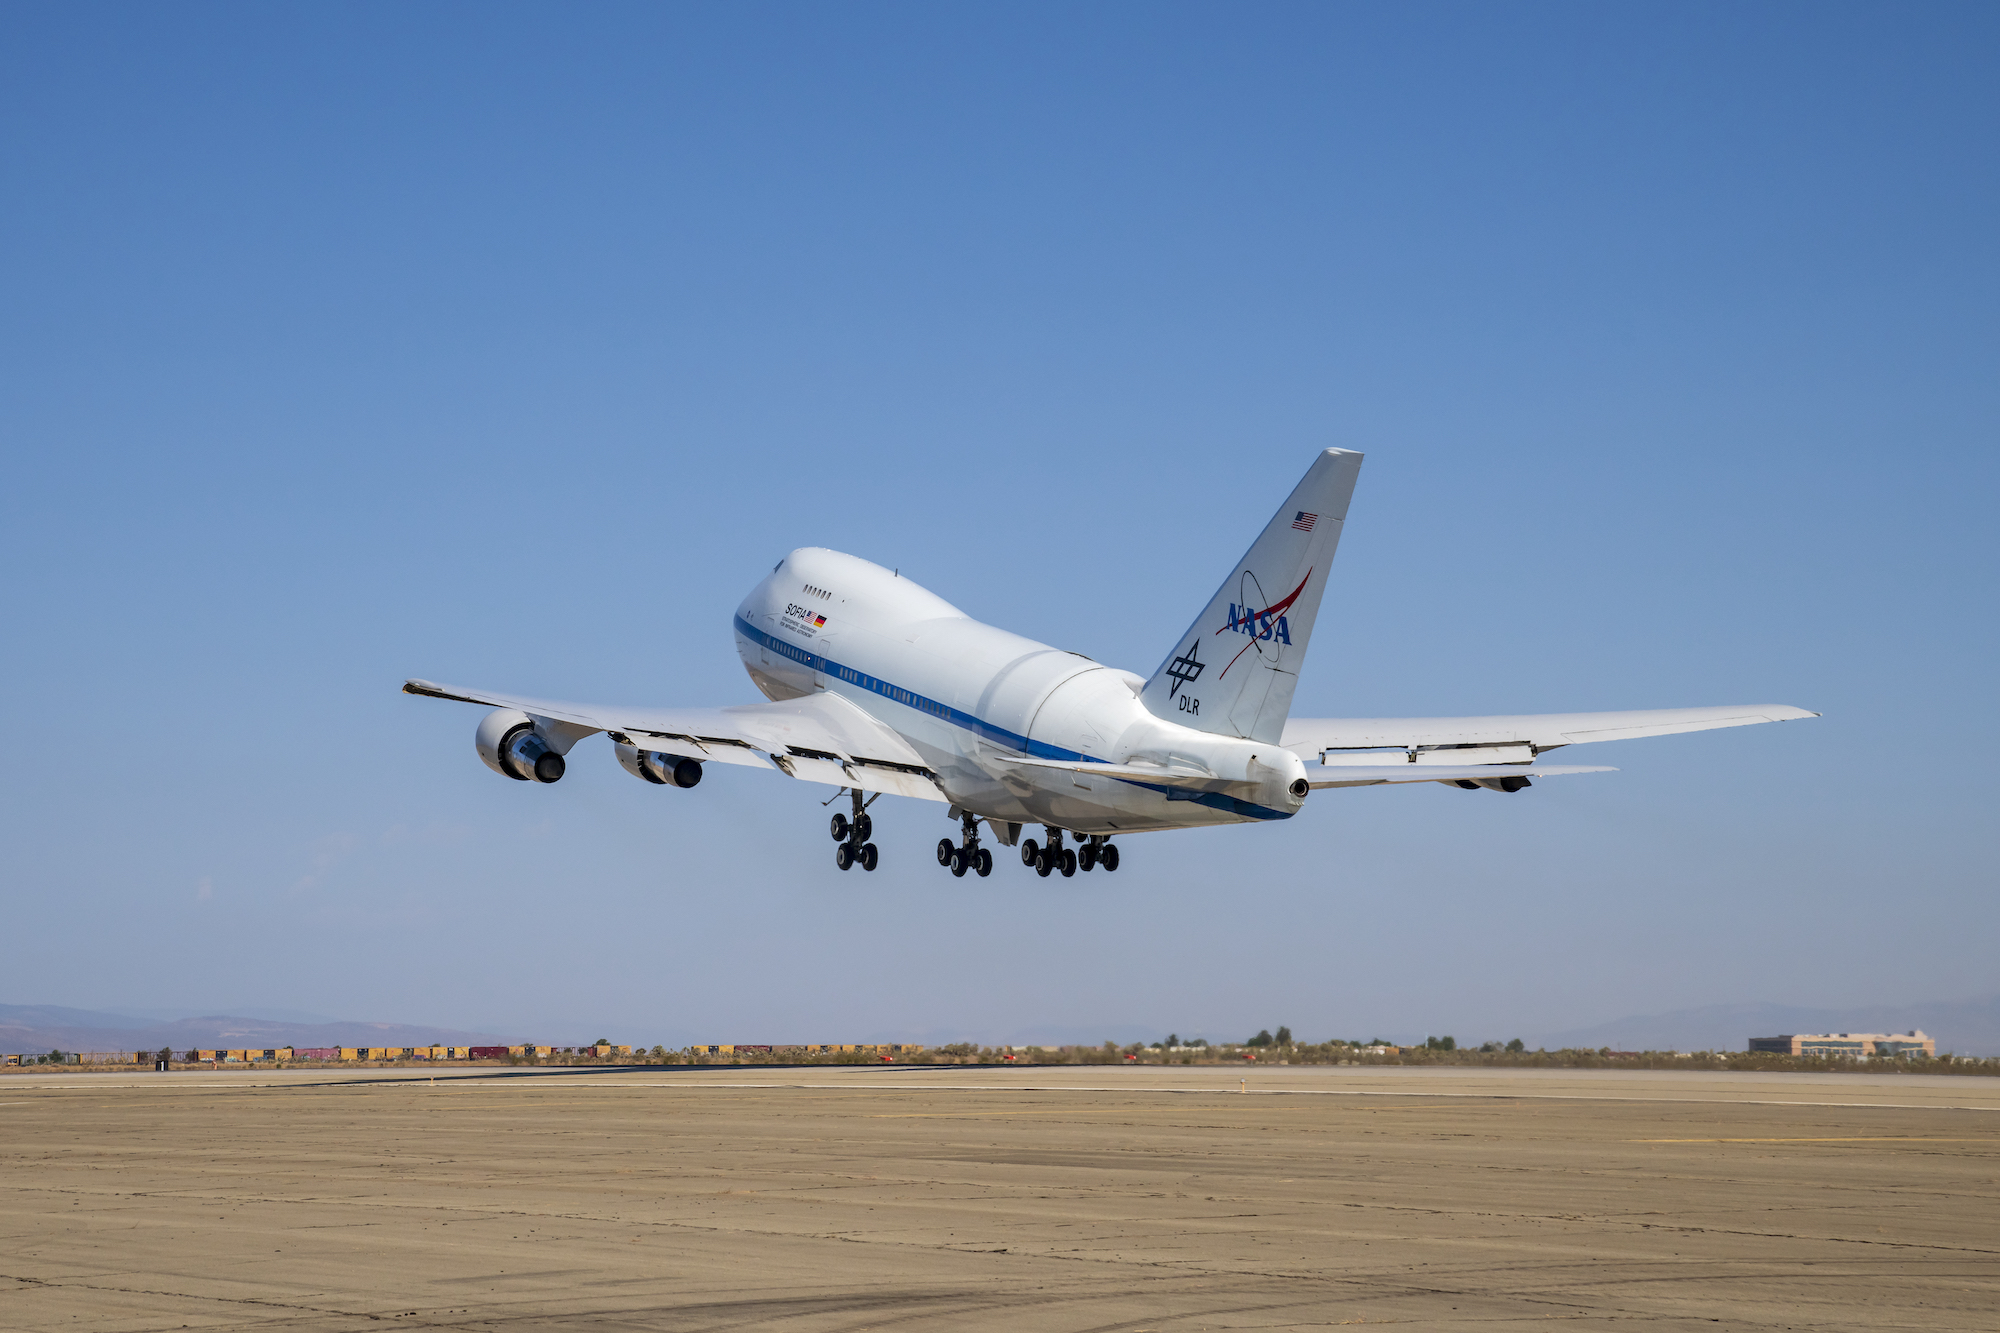 NASA’s 747 space observatory is reaching the end of its flight plan